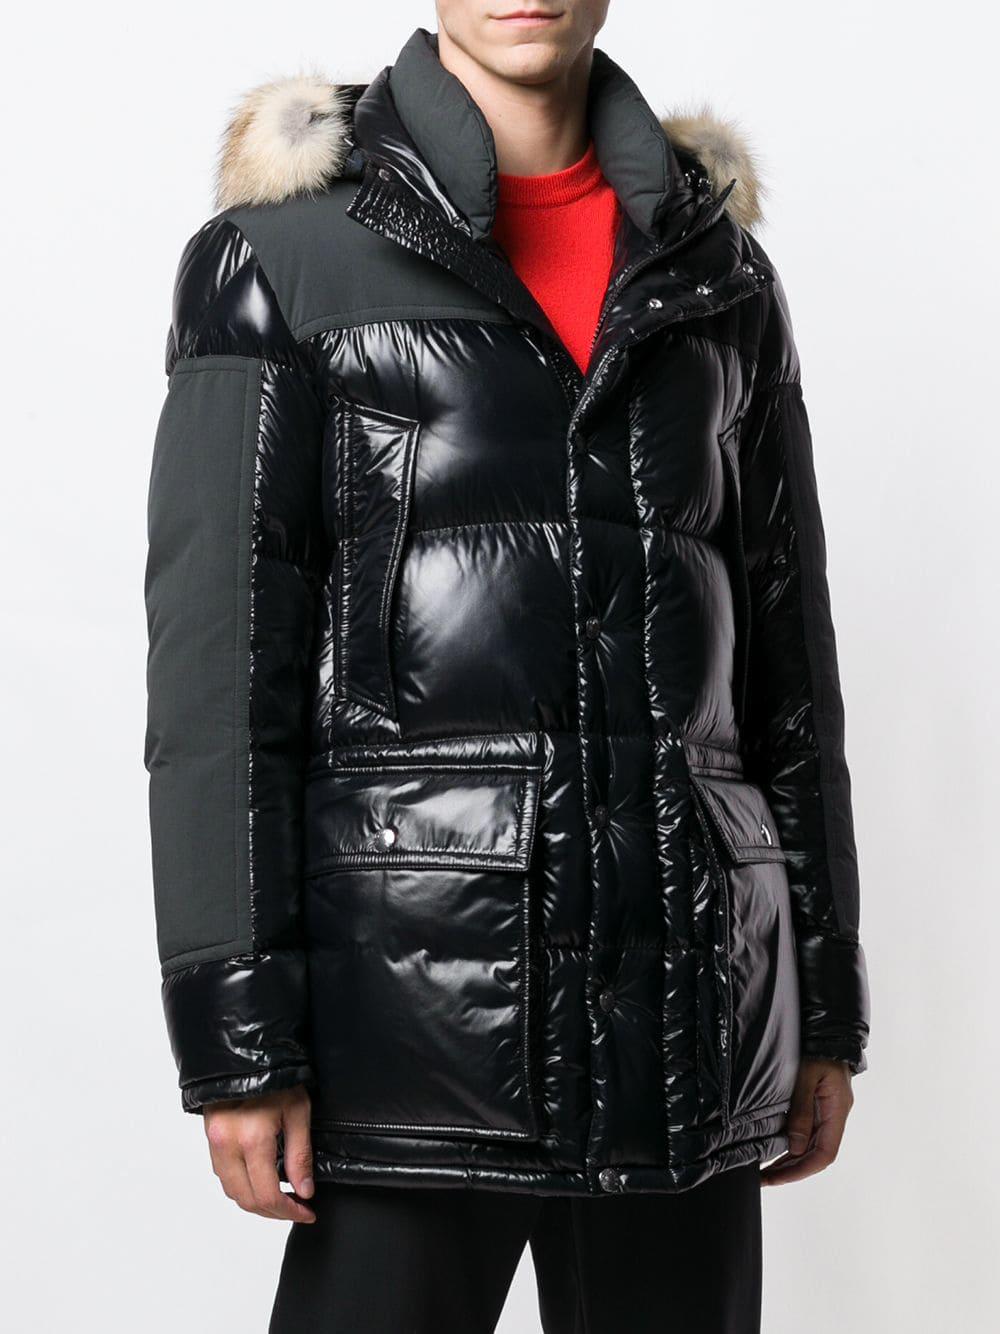 Moncler Synthetic Frey Padded Jacket in Black for Men - Save 35% - Lyst